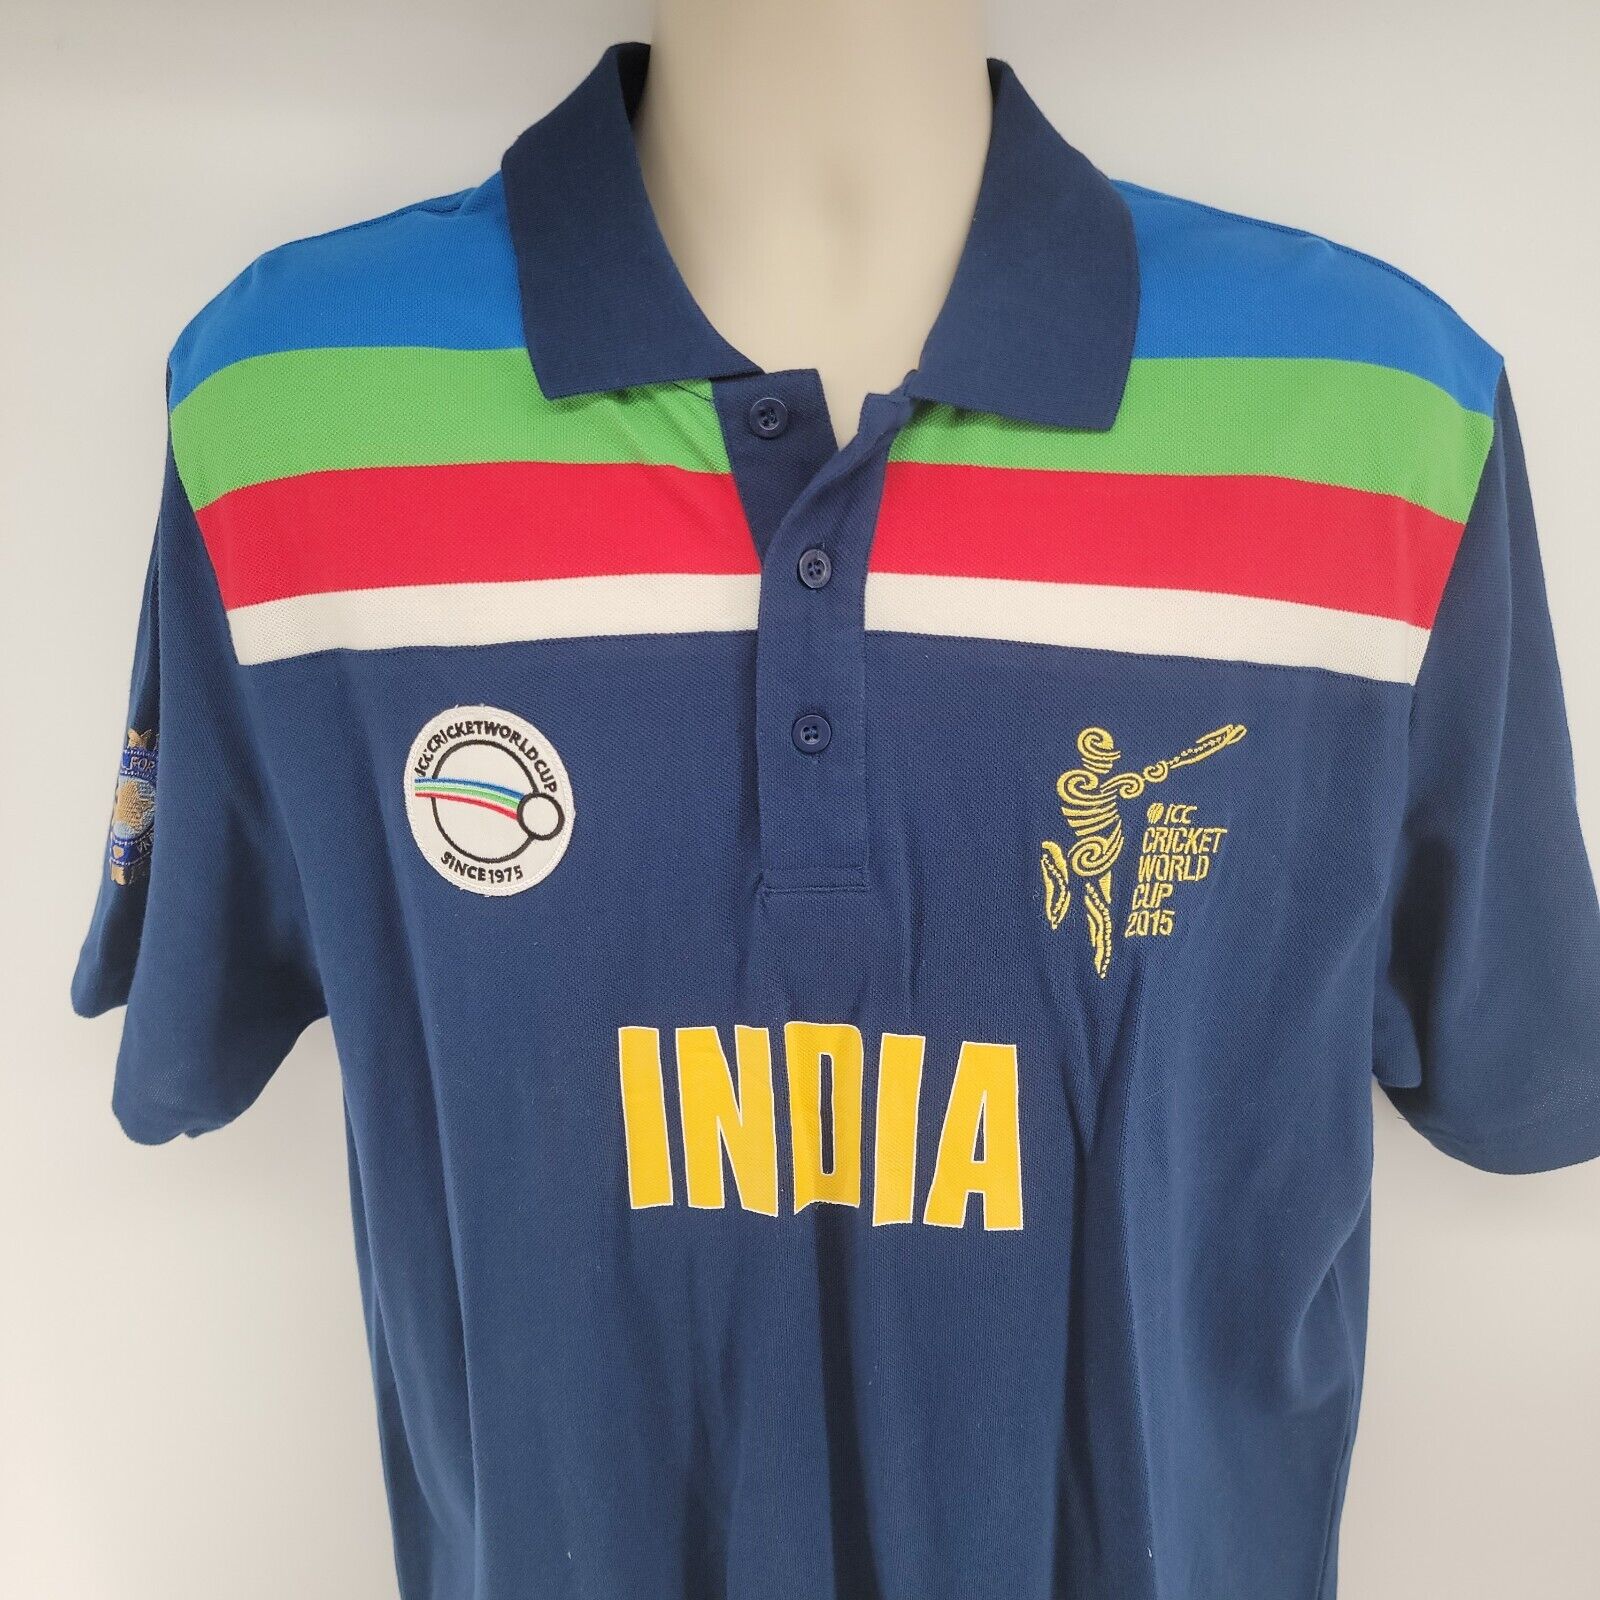 ICC Cricket World Cup 2015 India Jersey Polo Shirt Mens 2XL ICC Cricket World Cup CWC12398 - фотография #8